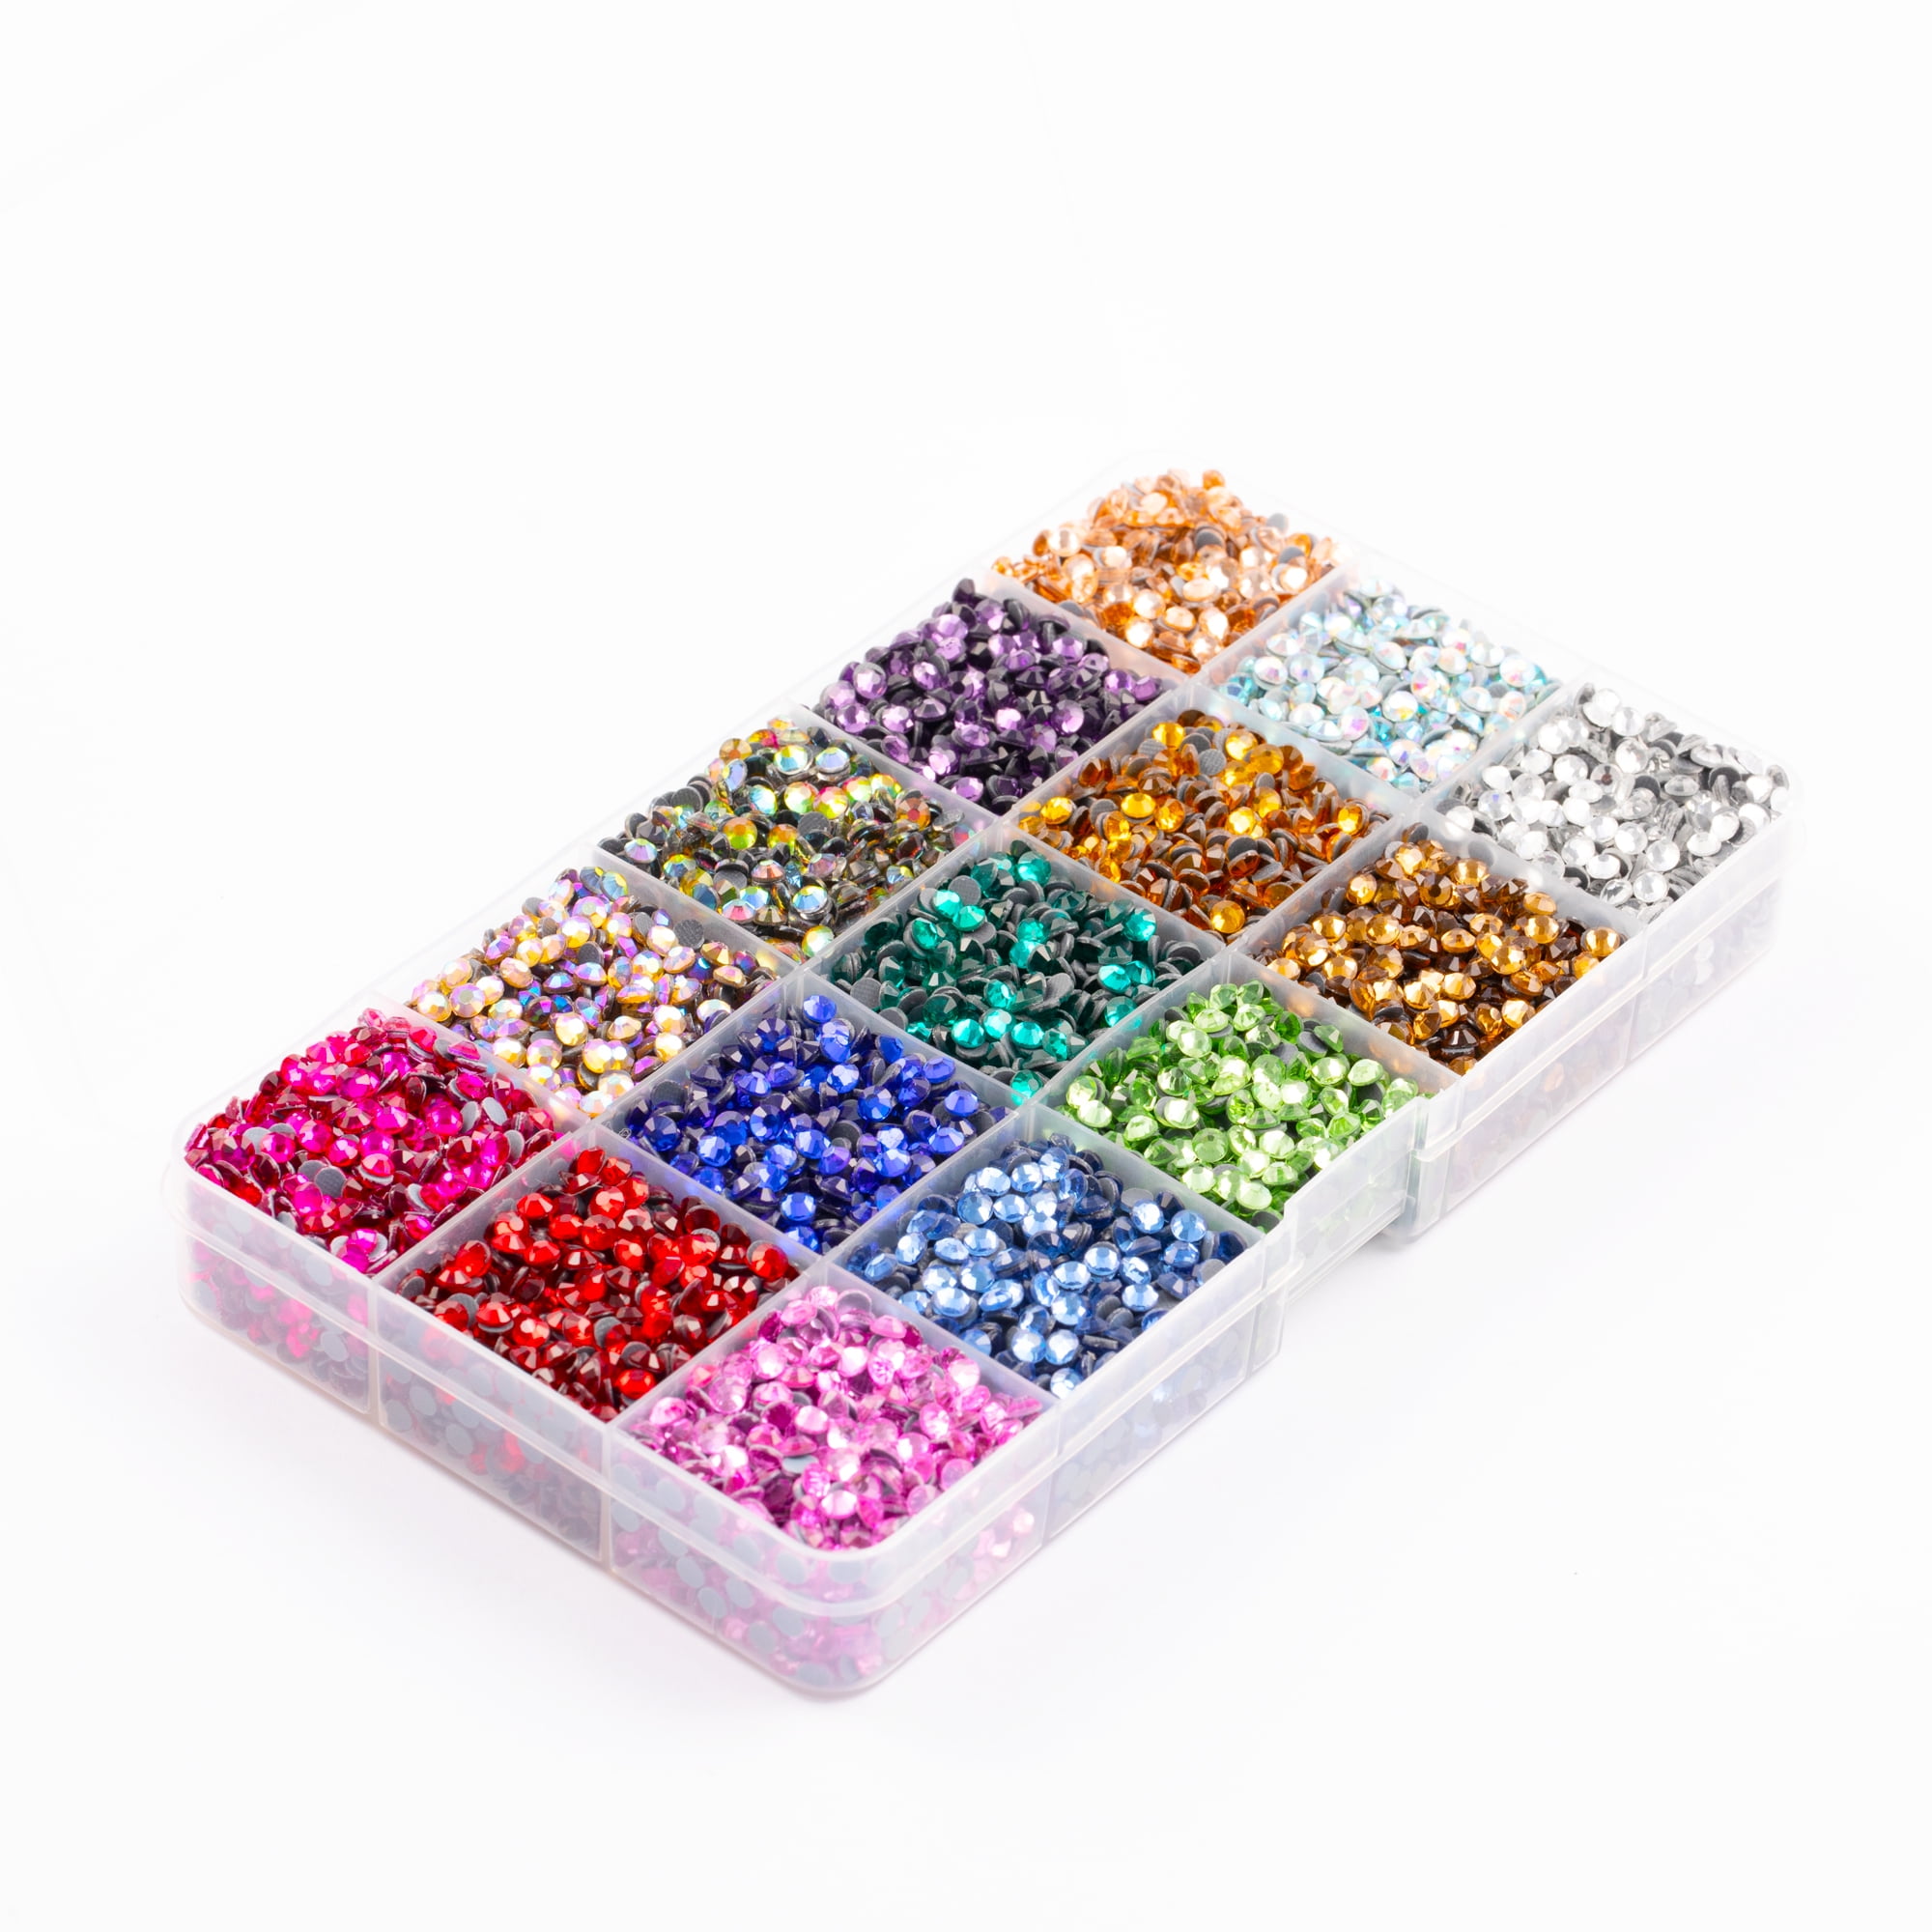 Worthofbest Hotfix Applicator Bedazzler Kit with Rhinestones Hotfix Tool for Crafts Clothes Shoes Fabric Clothing Hot Fix Tool for Holes